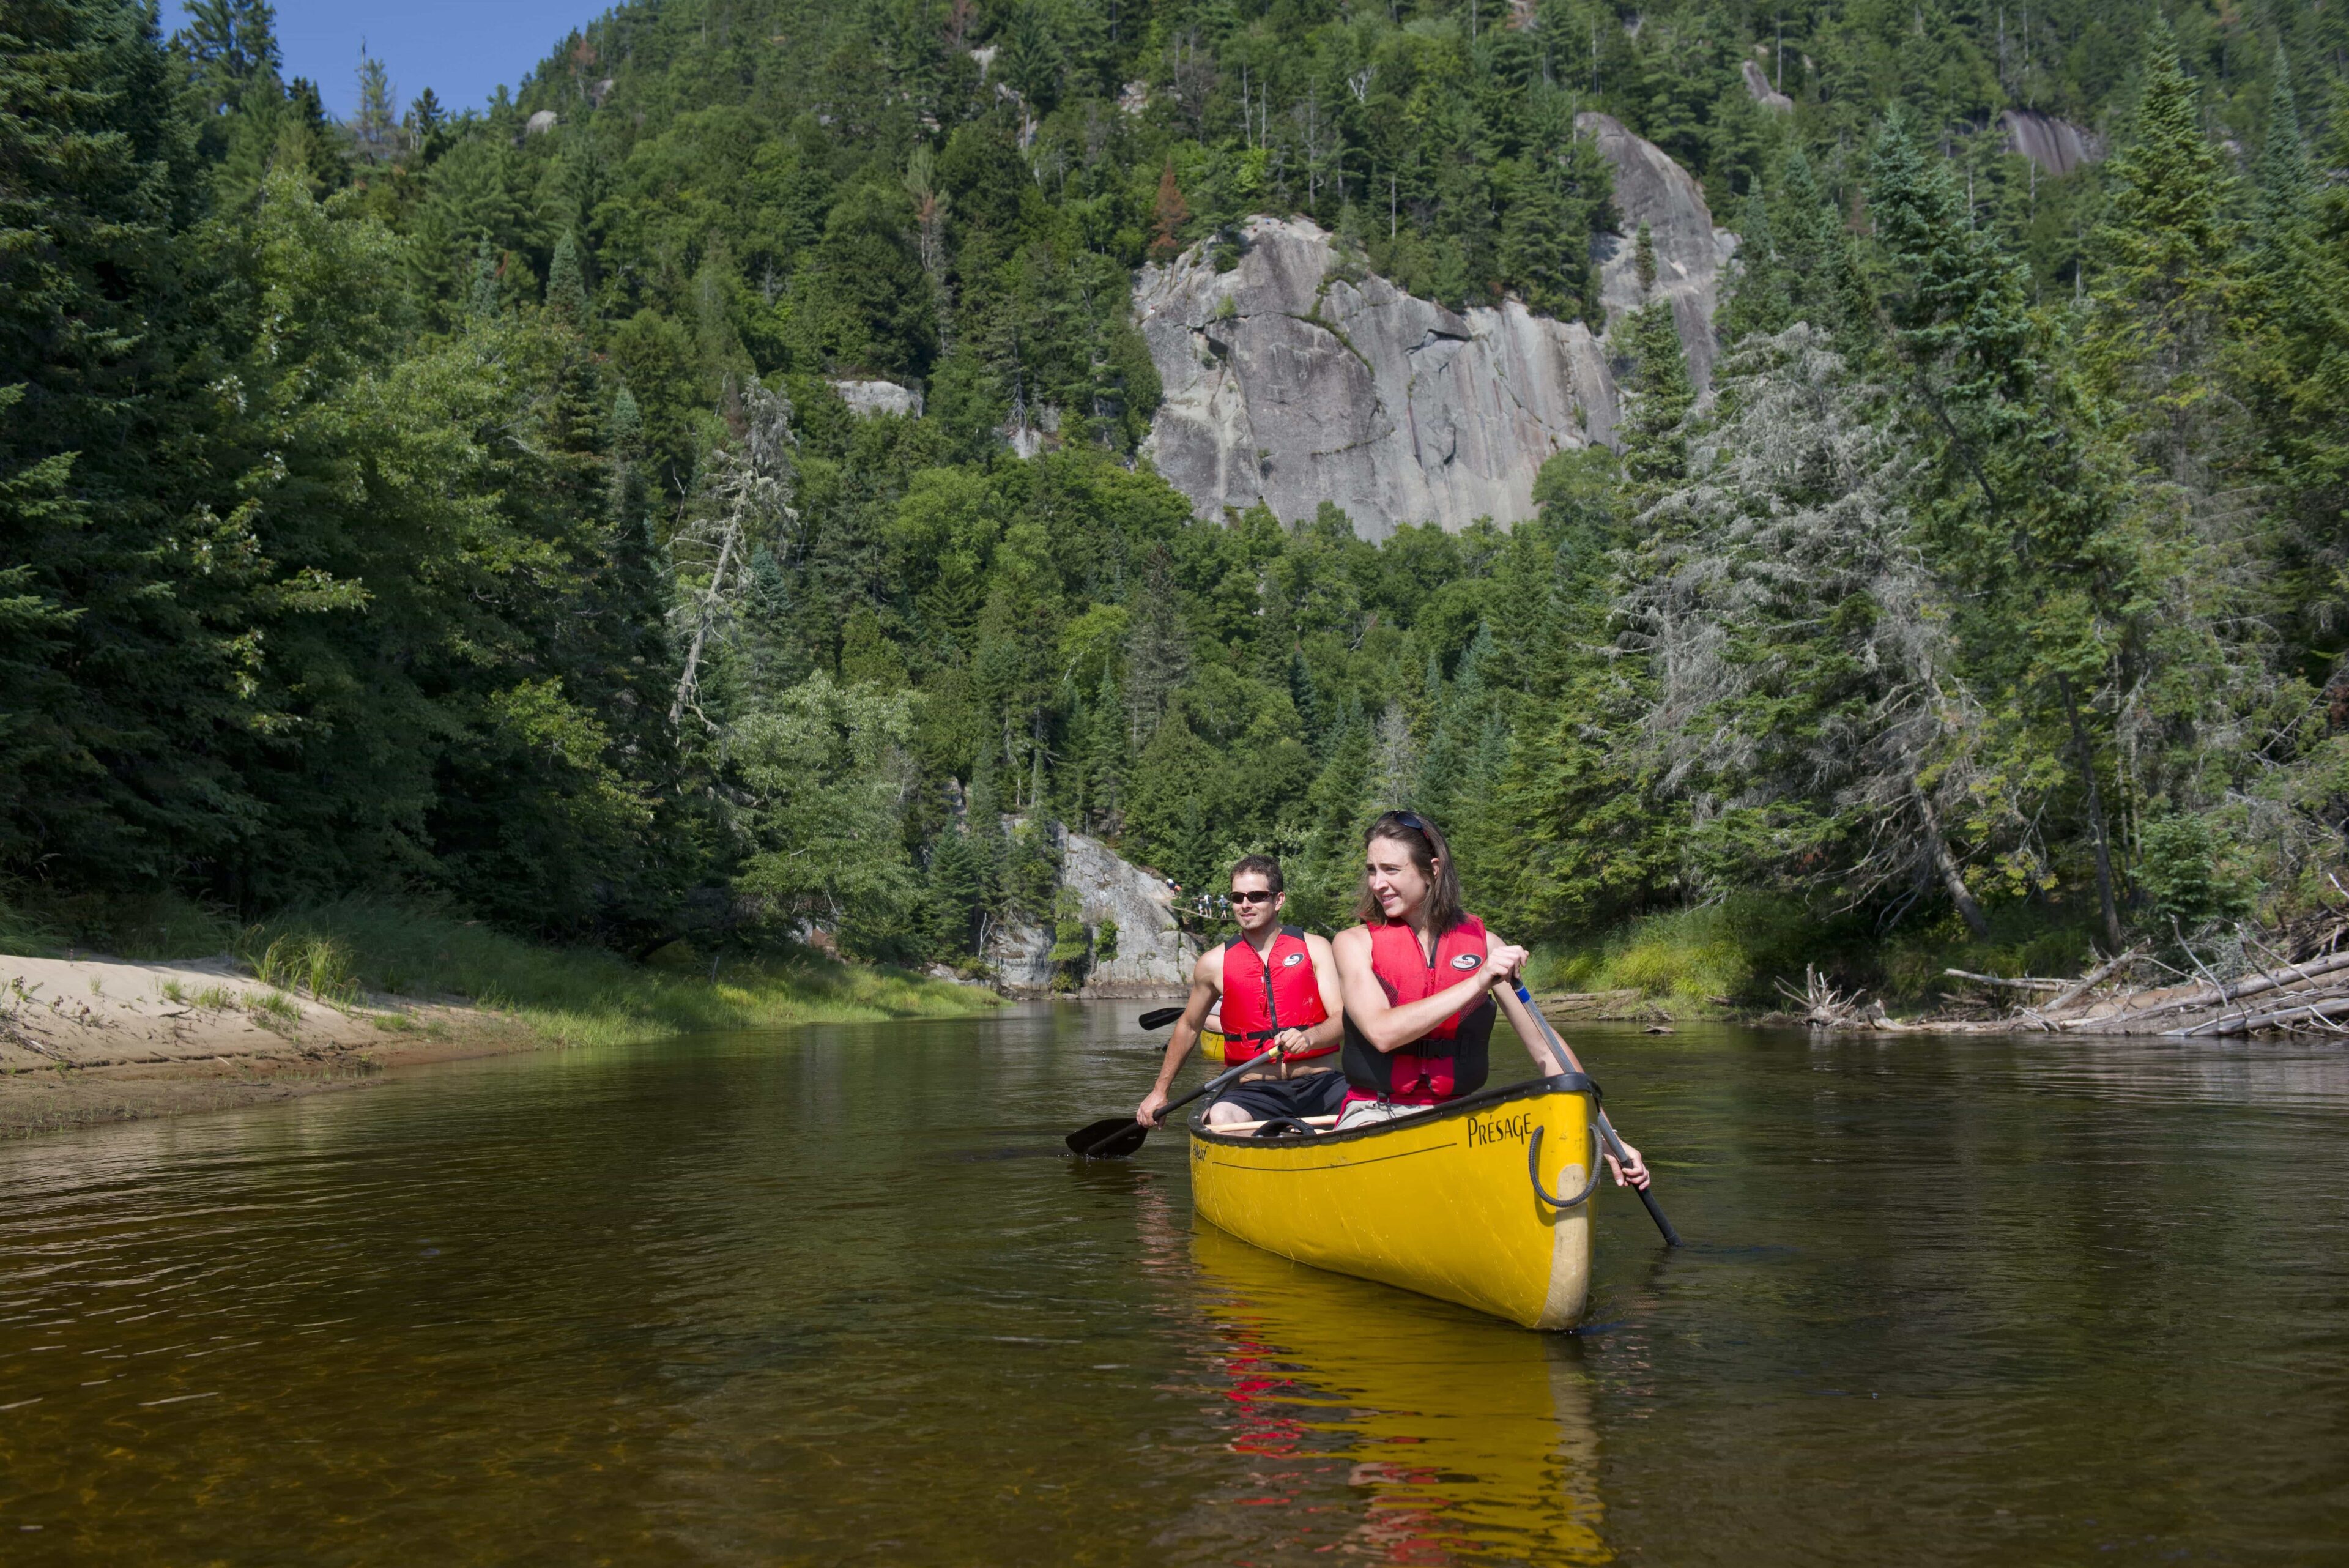 Man and woman paddle yellow canoe on river with cliff in background.